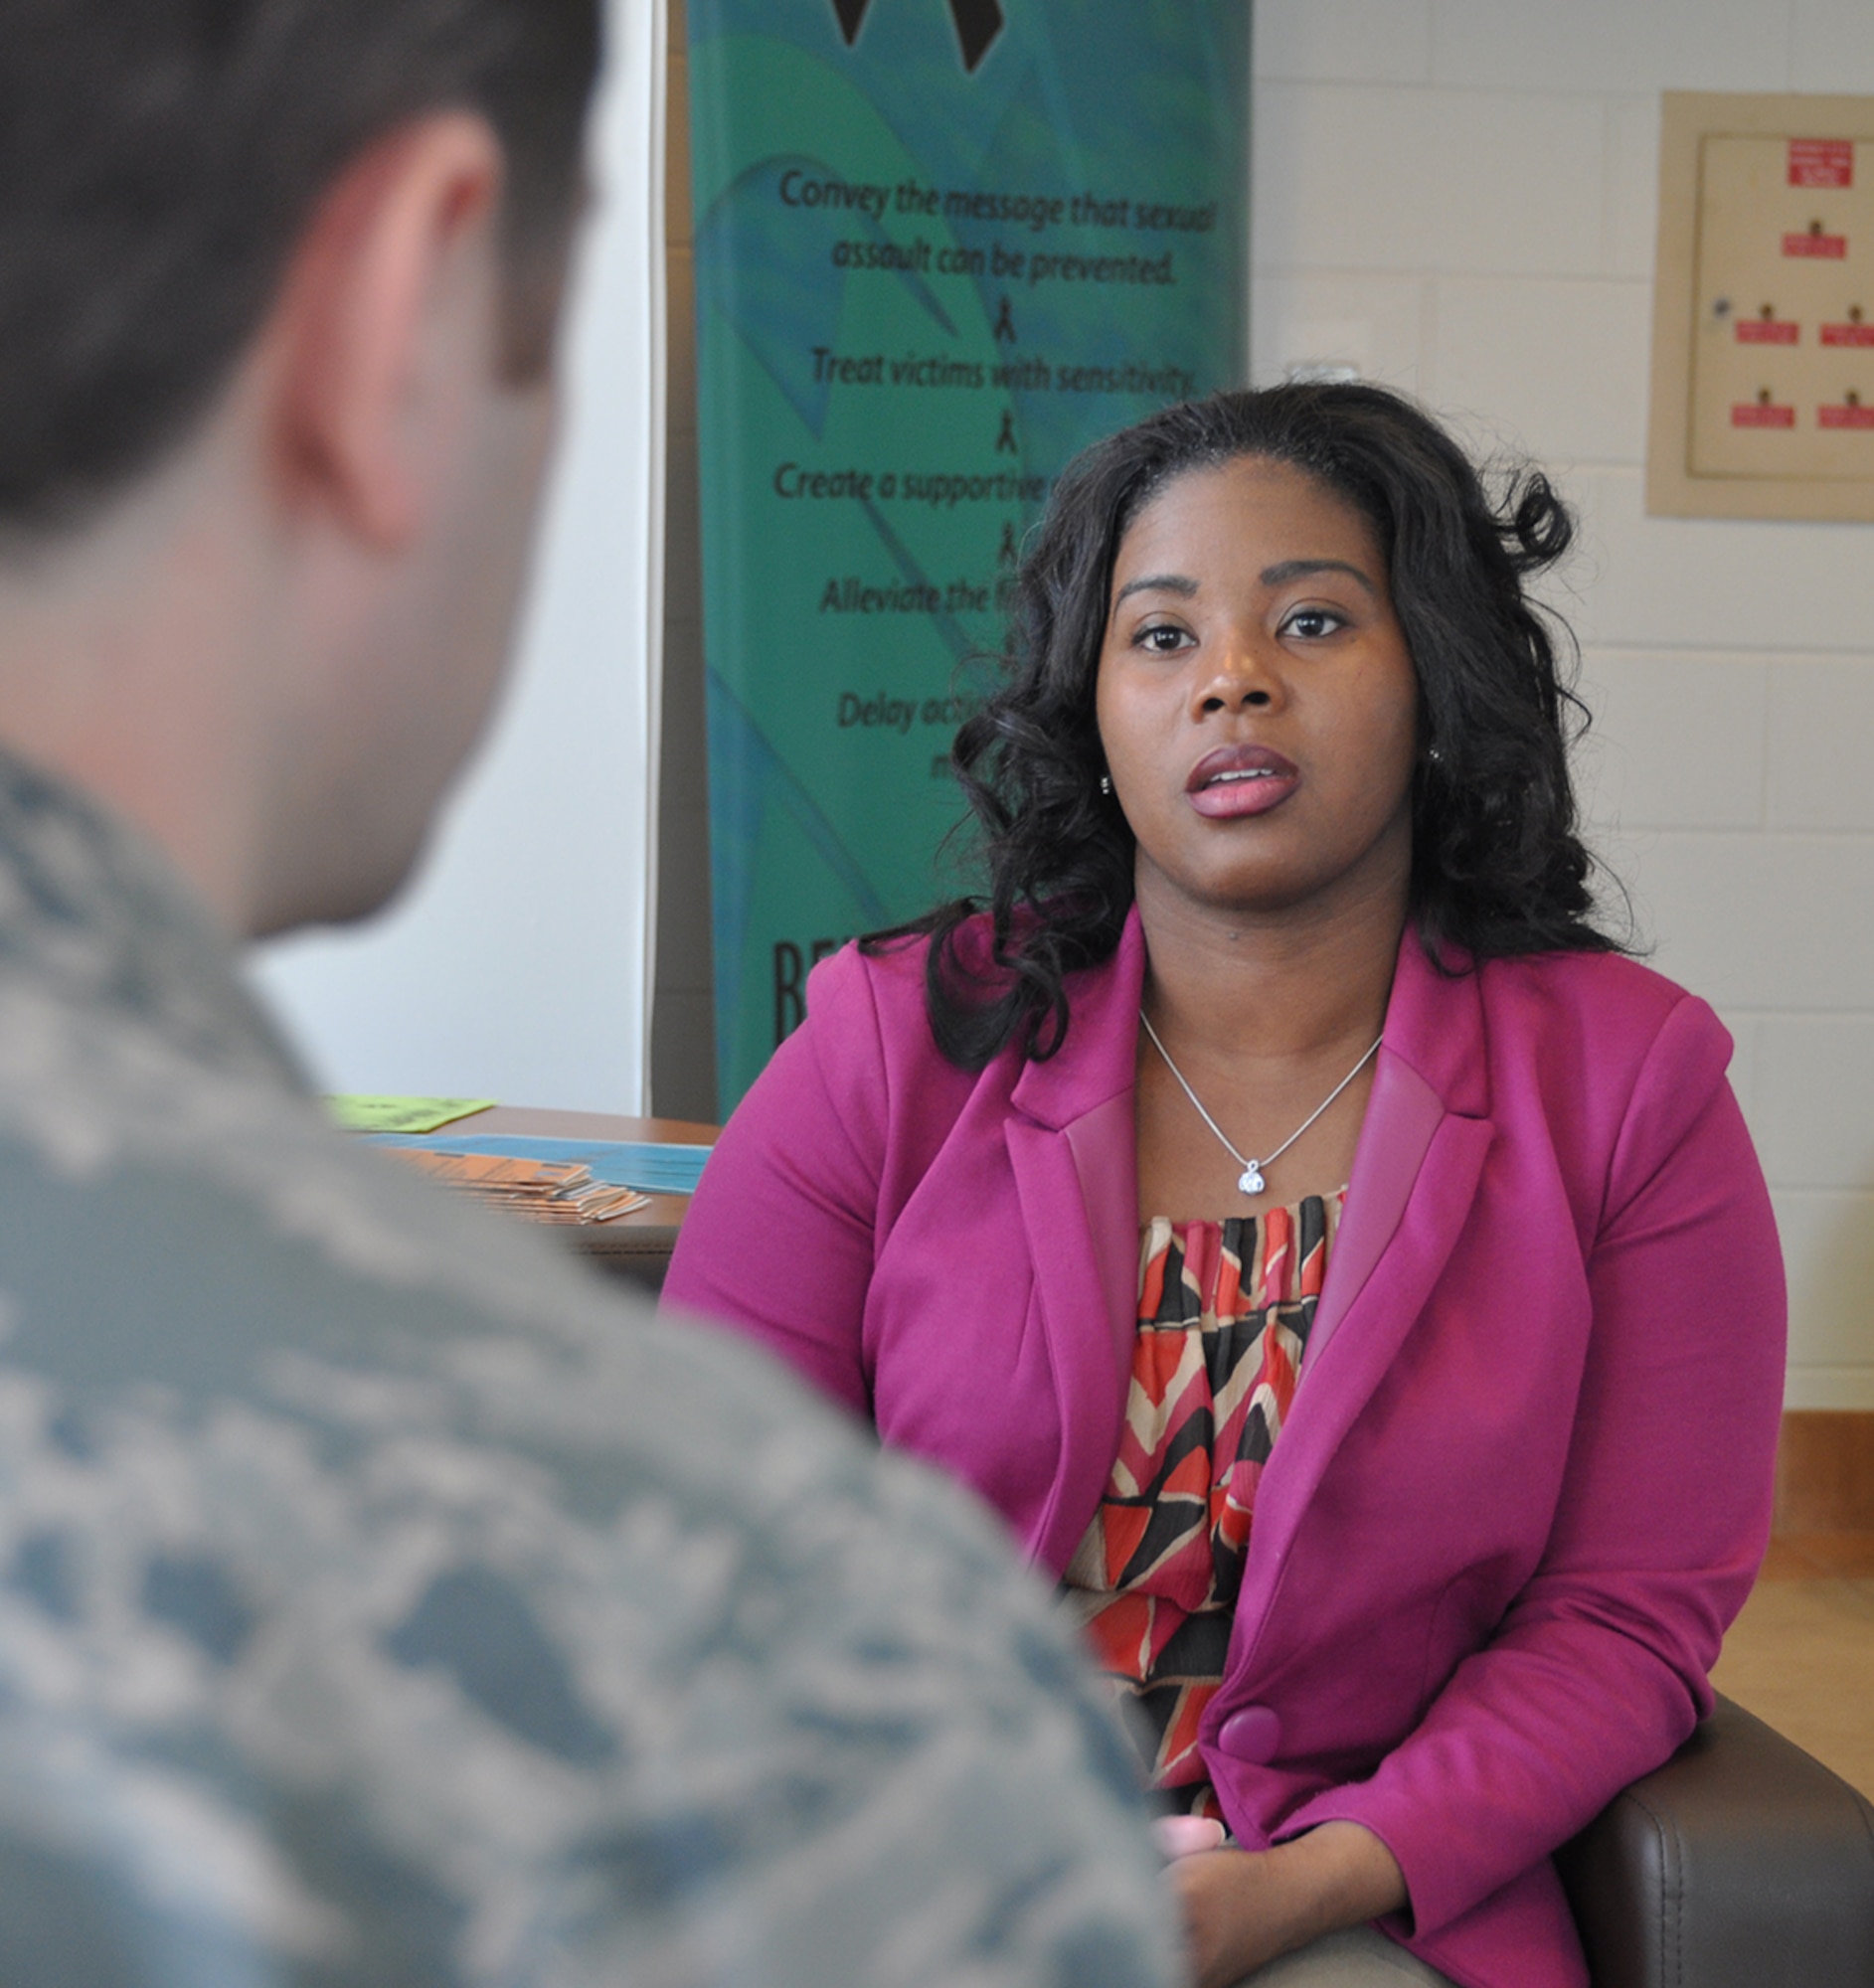 Tandra Hunter, 94th Airlift Wing violence prevention integrator and Green Dot Program Manager, maintains the wing's comprehensive violence-related primary prevention program.